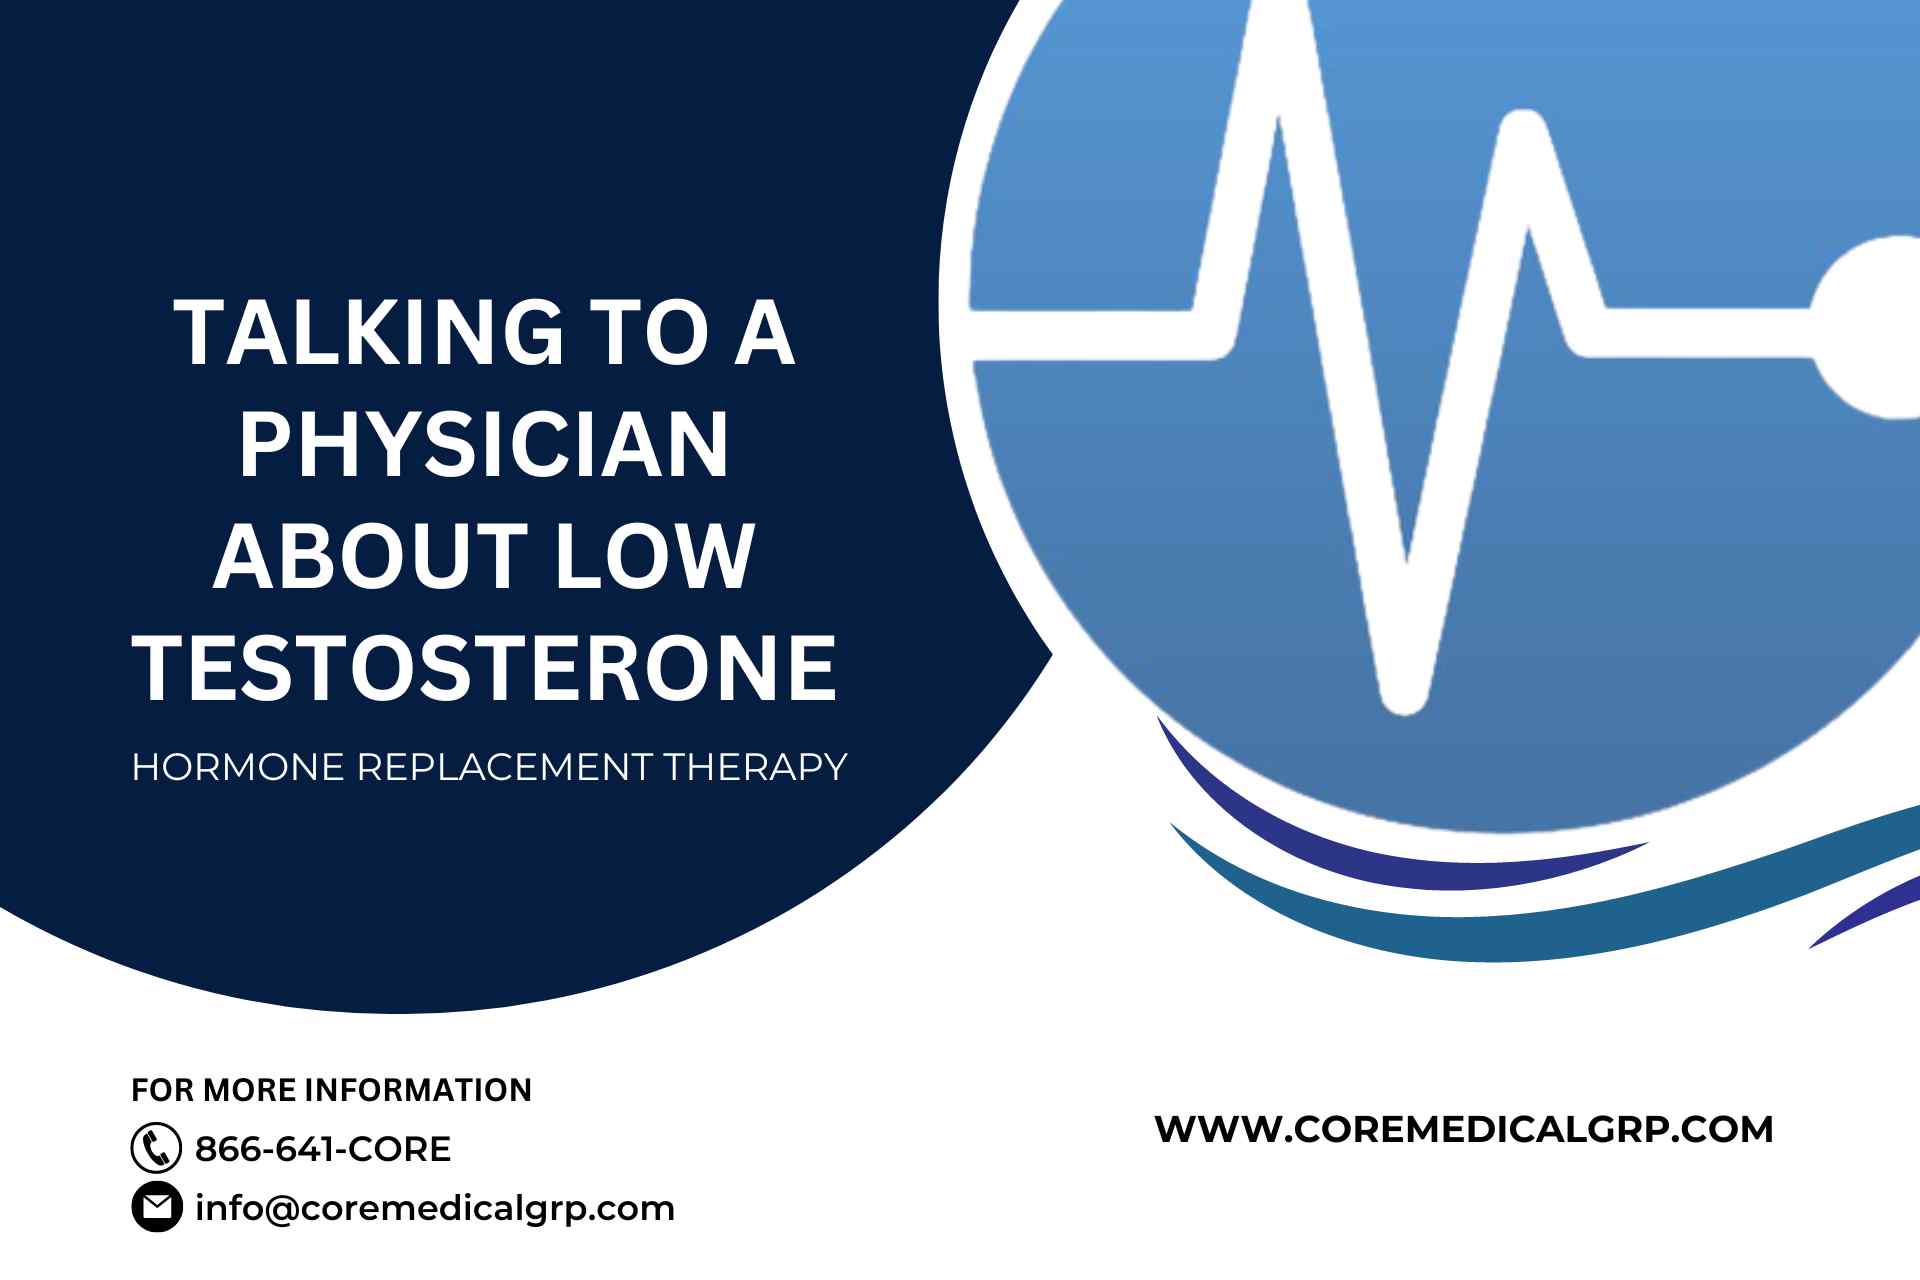 Talking to a Physician About Low Testosterone